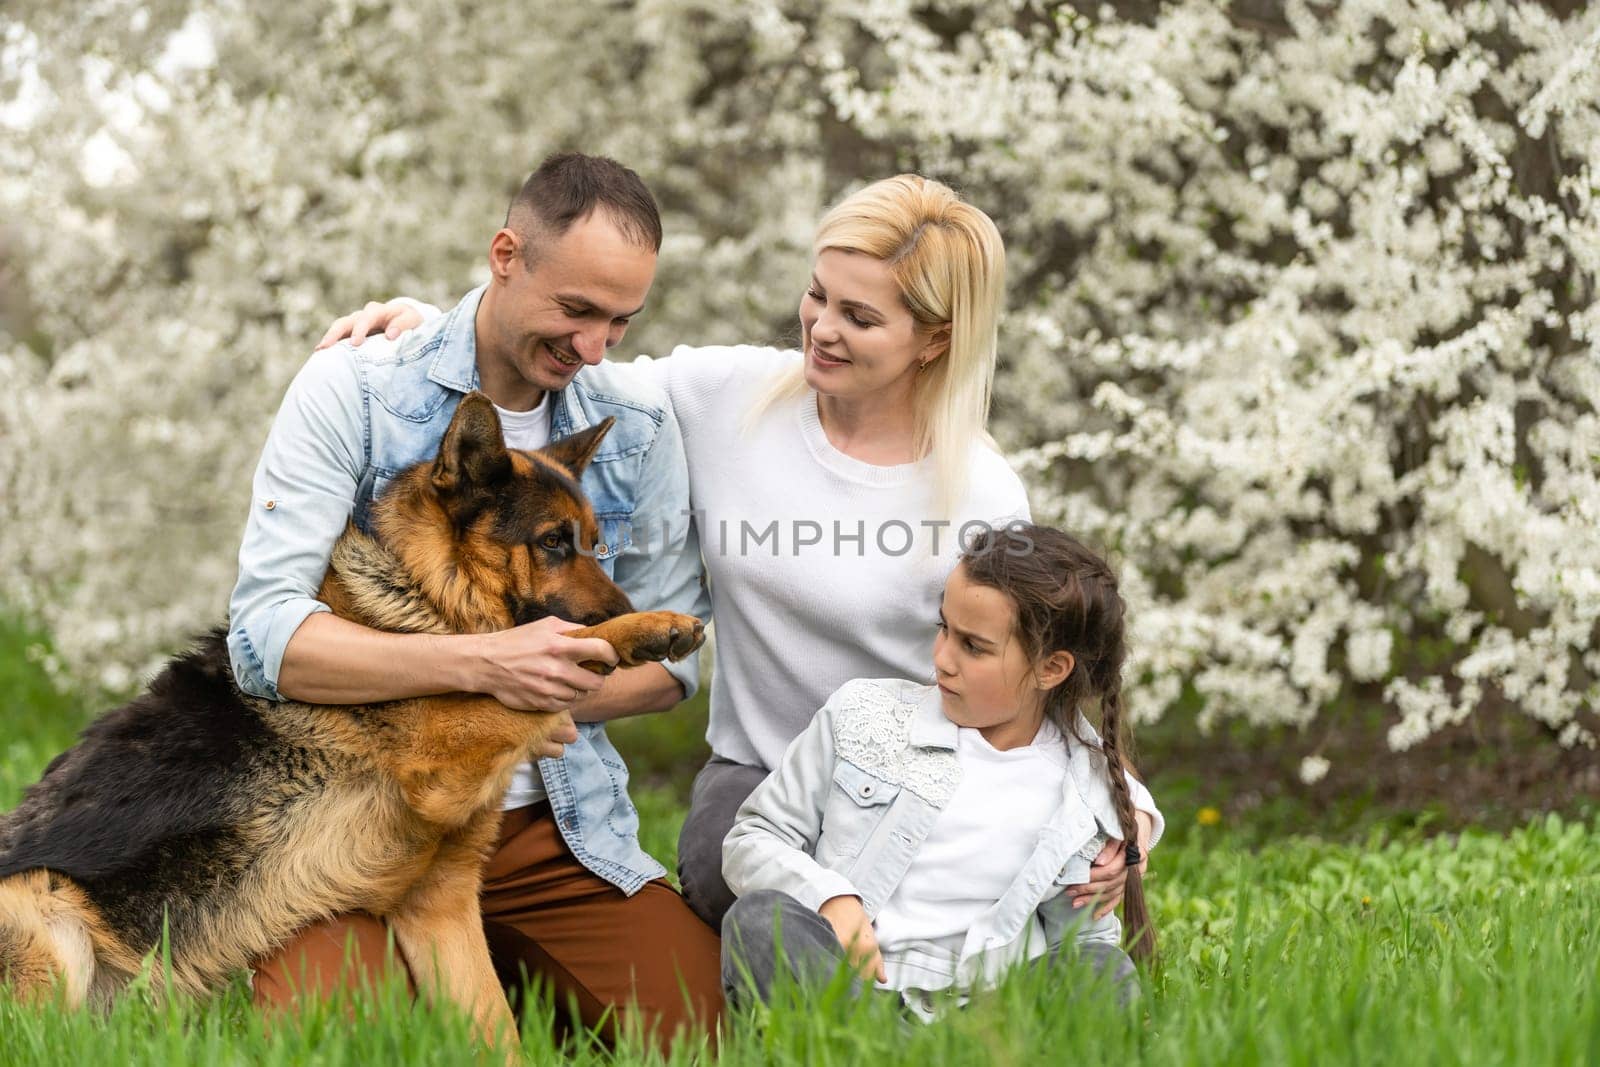 Outdoor portrait of happy young family playing in spring park under blooming tree, lovely family having fun in sunny garden.